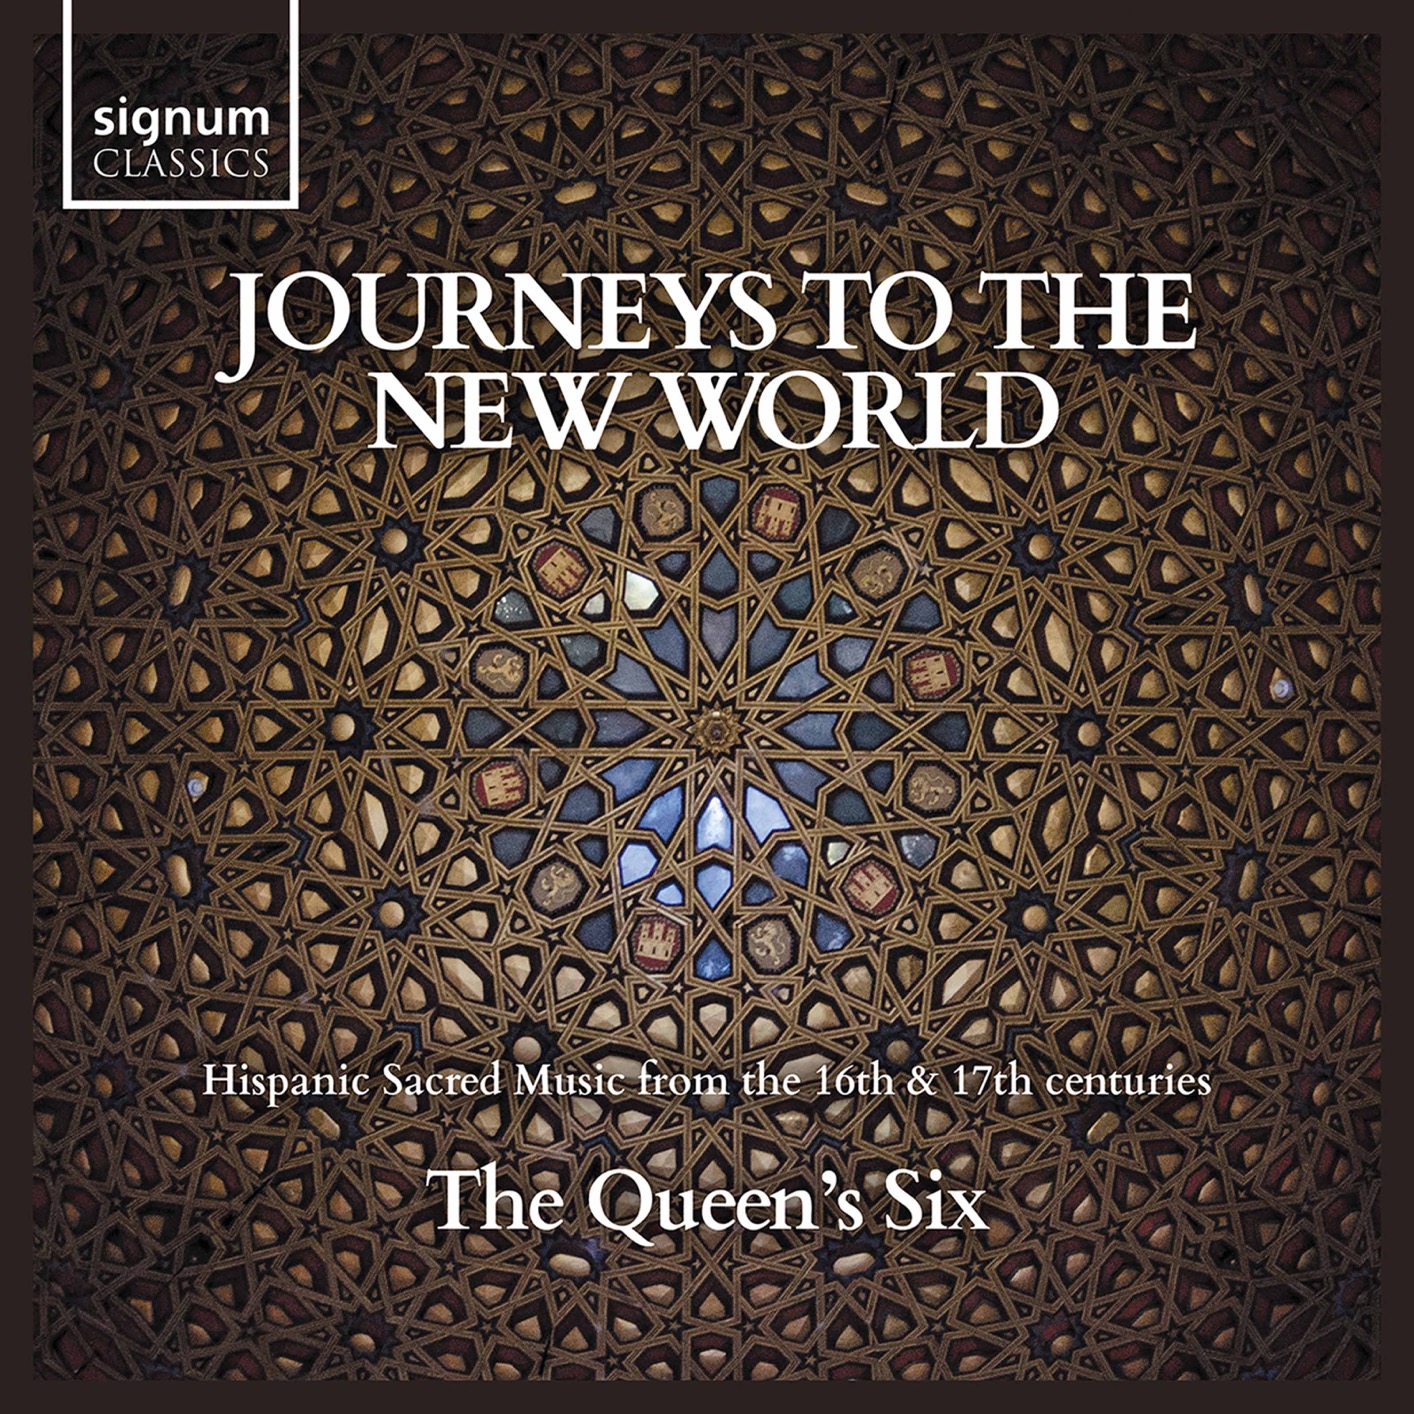 The Queen’s Six - Journeys to the New World (2020) [FLAC 24bit/192kHz]